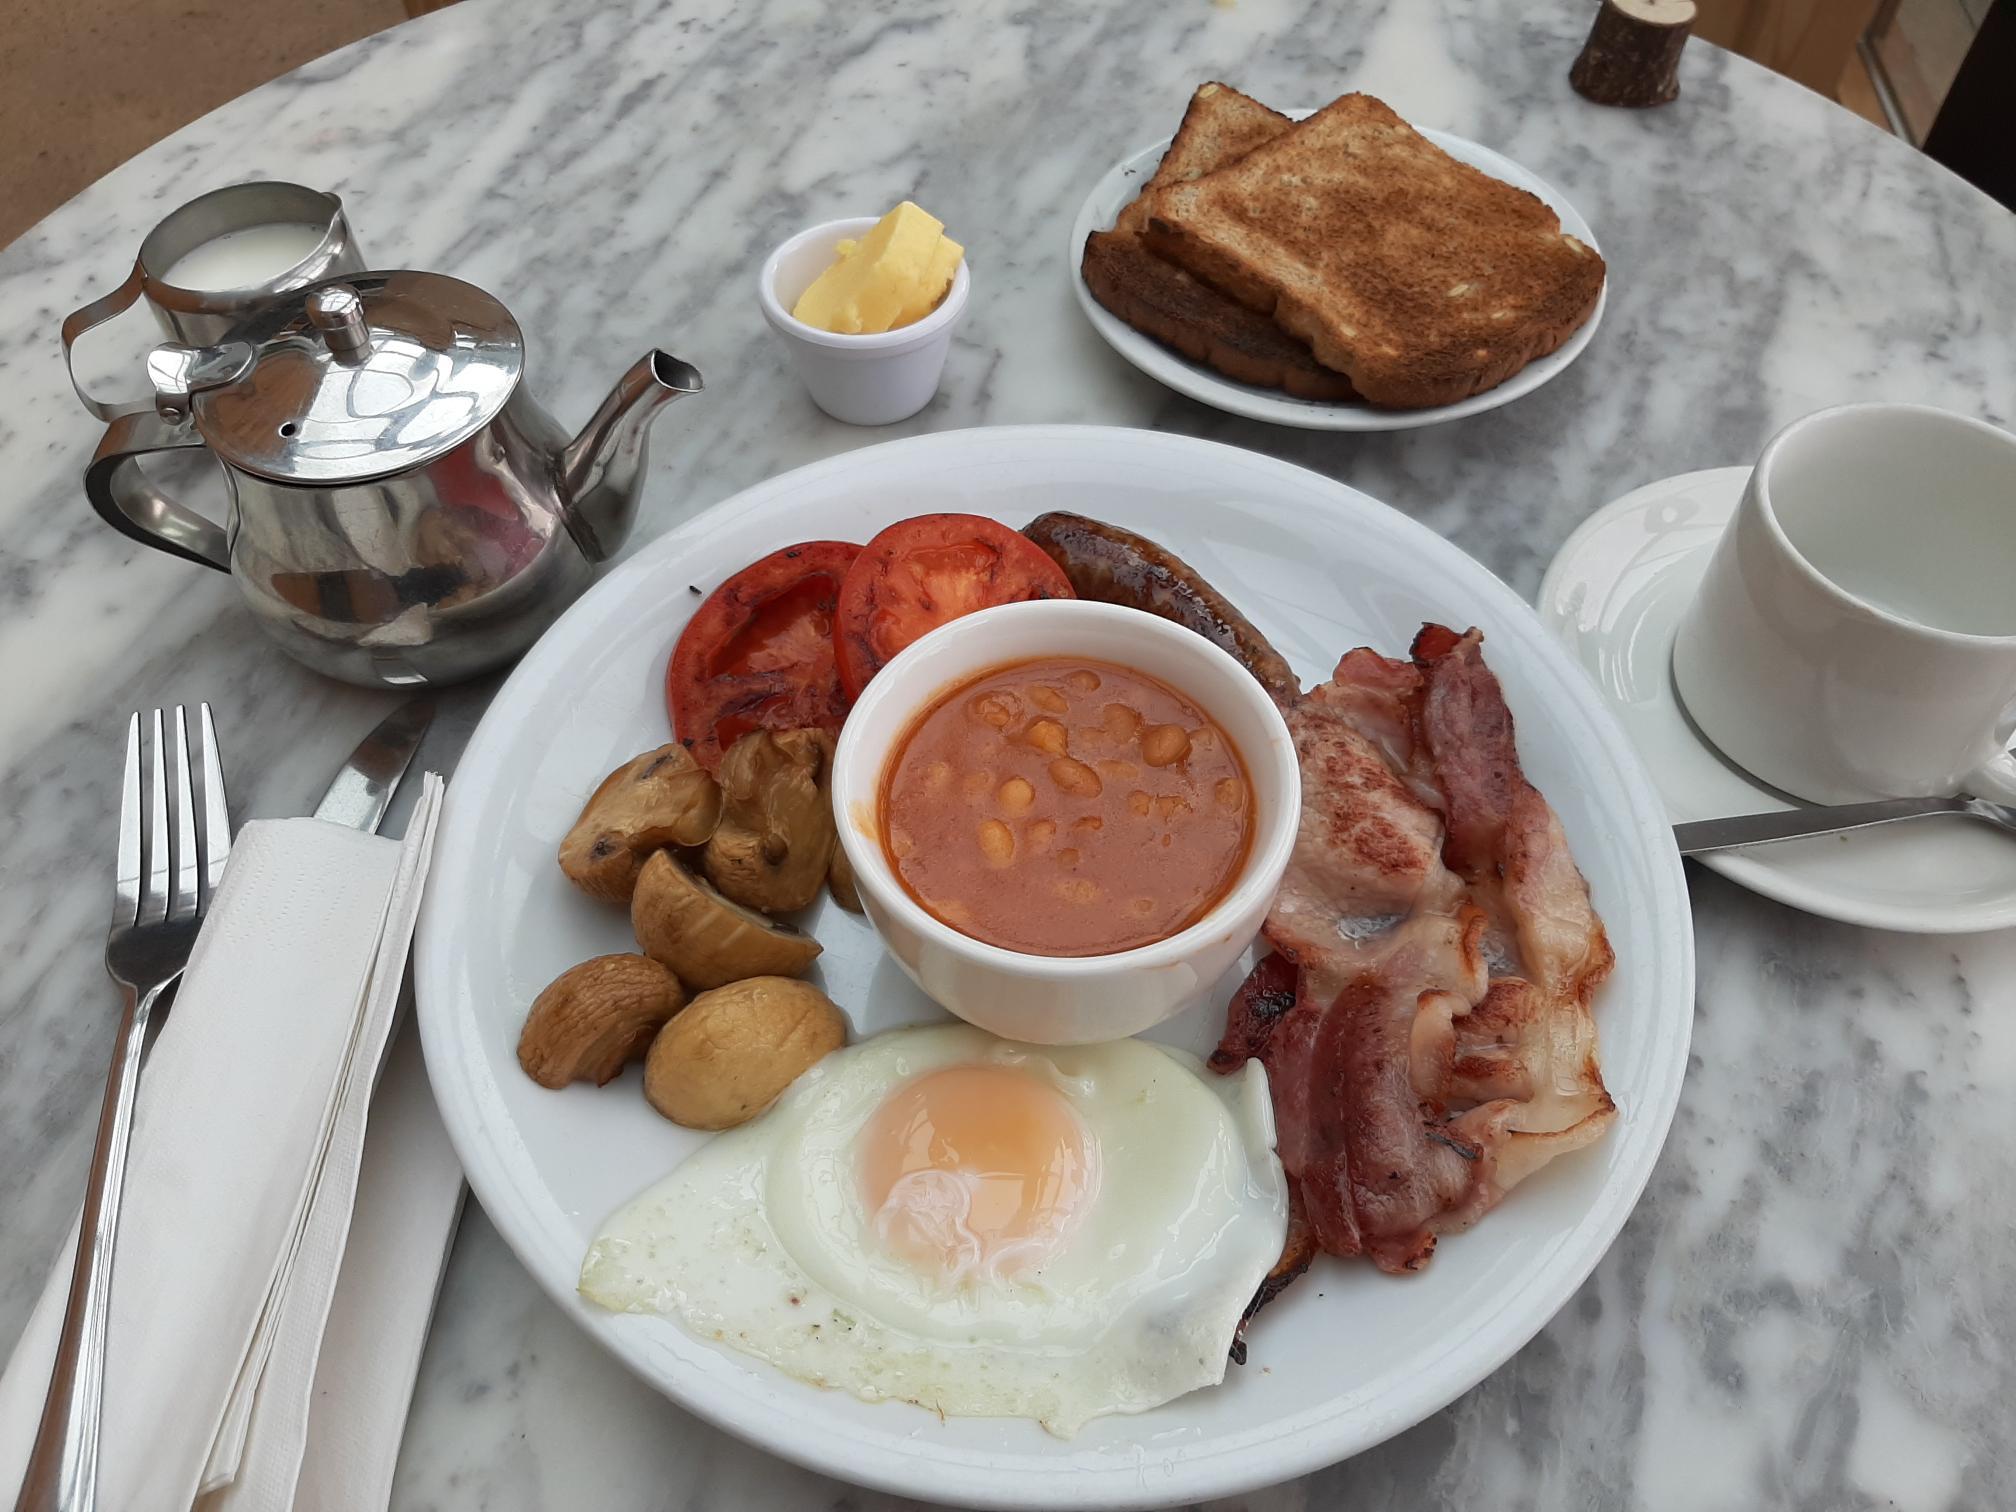 A full English breakfast (minus black pudding) at Cross Lanes Organic Farm Shop and Cafe